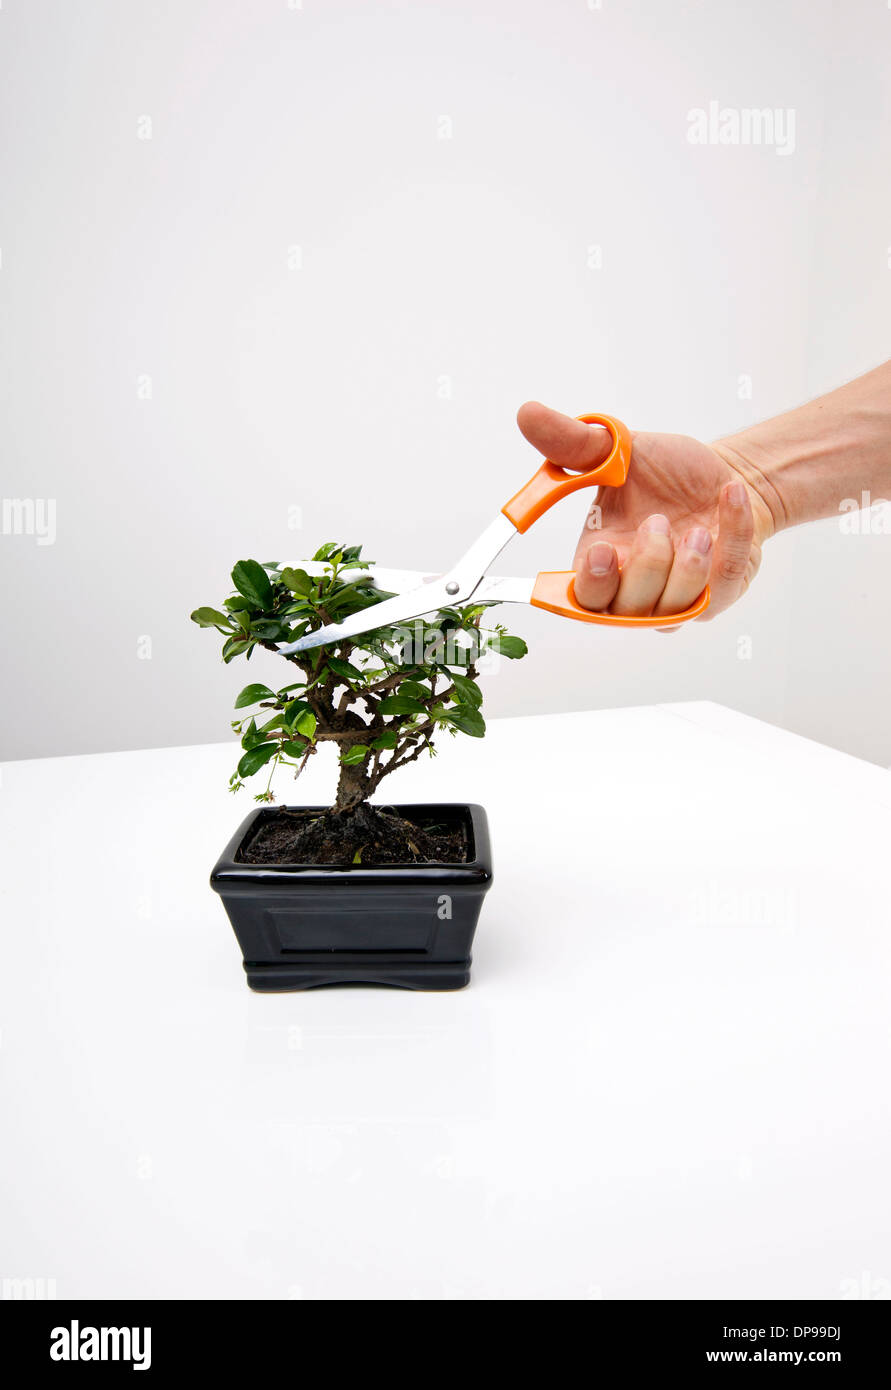 Man's hand cutting leaves of potted plant on table against gray background Stock Photo